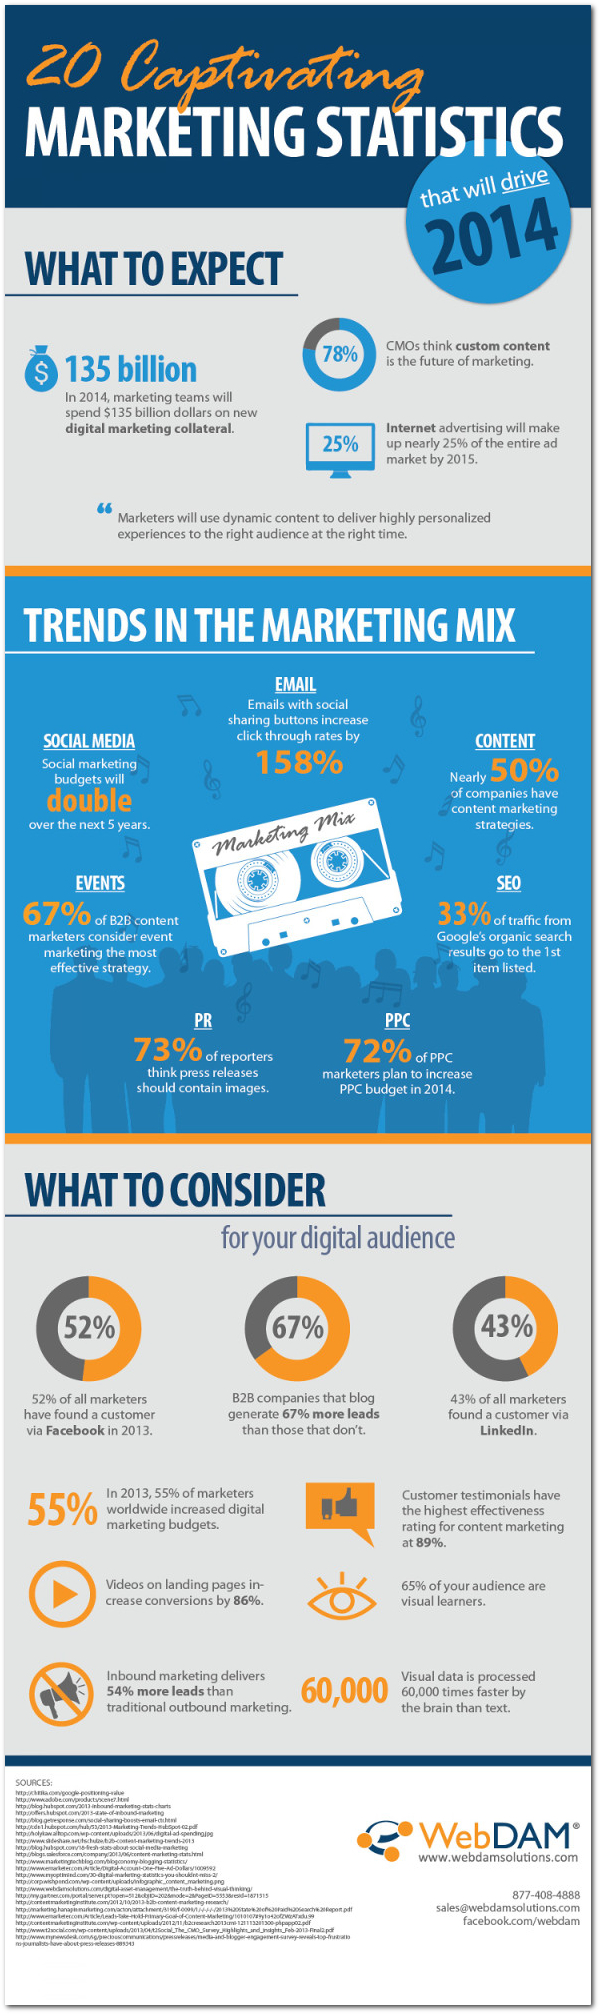 marketing trends for 2014